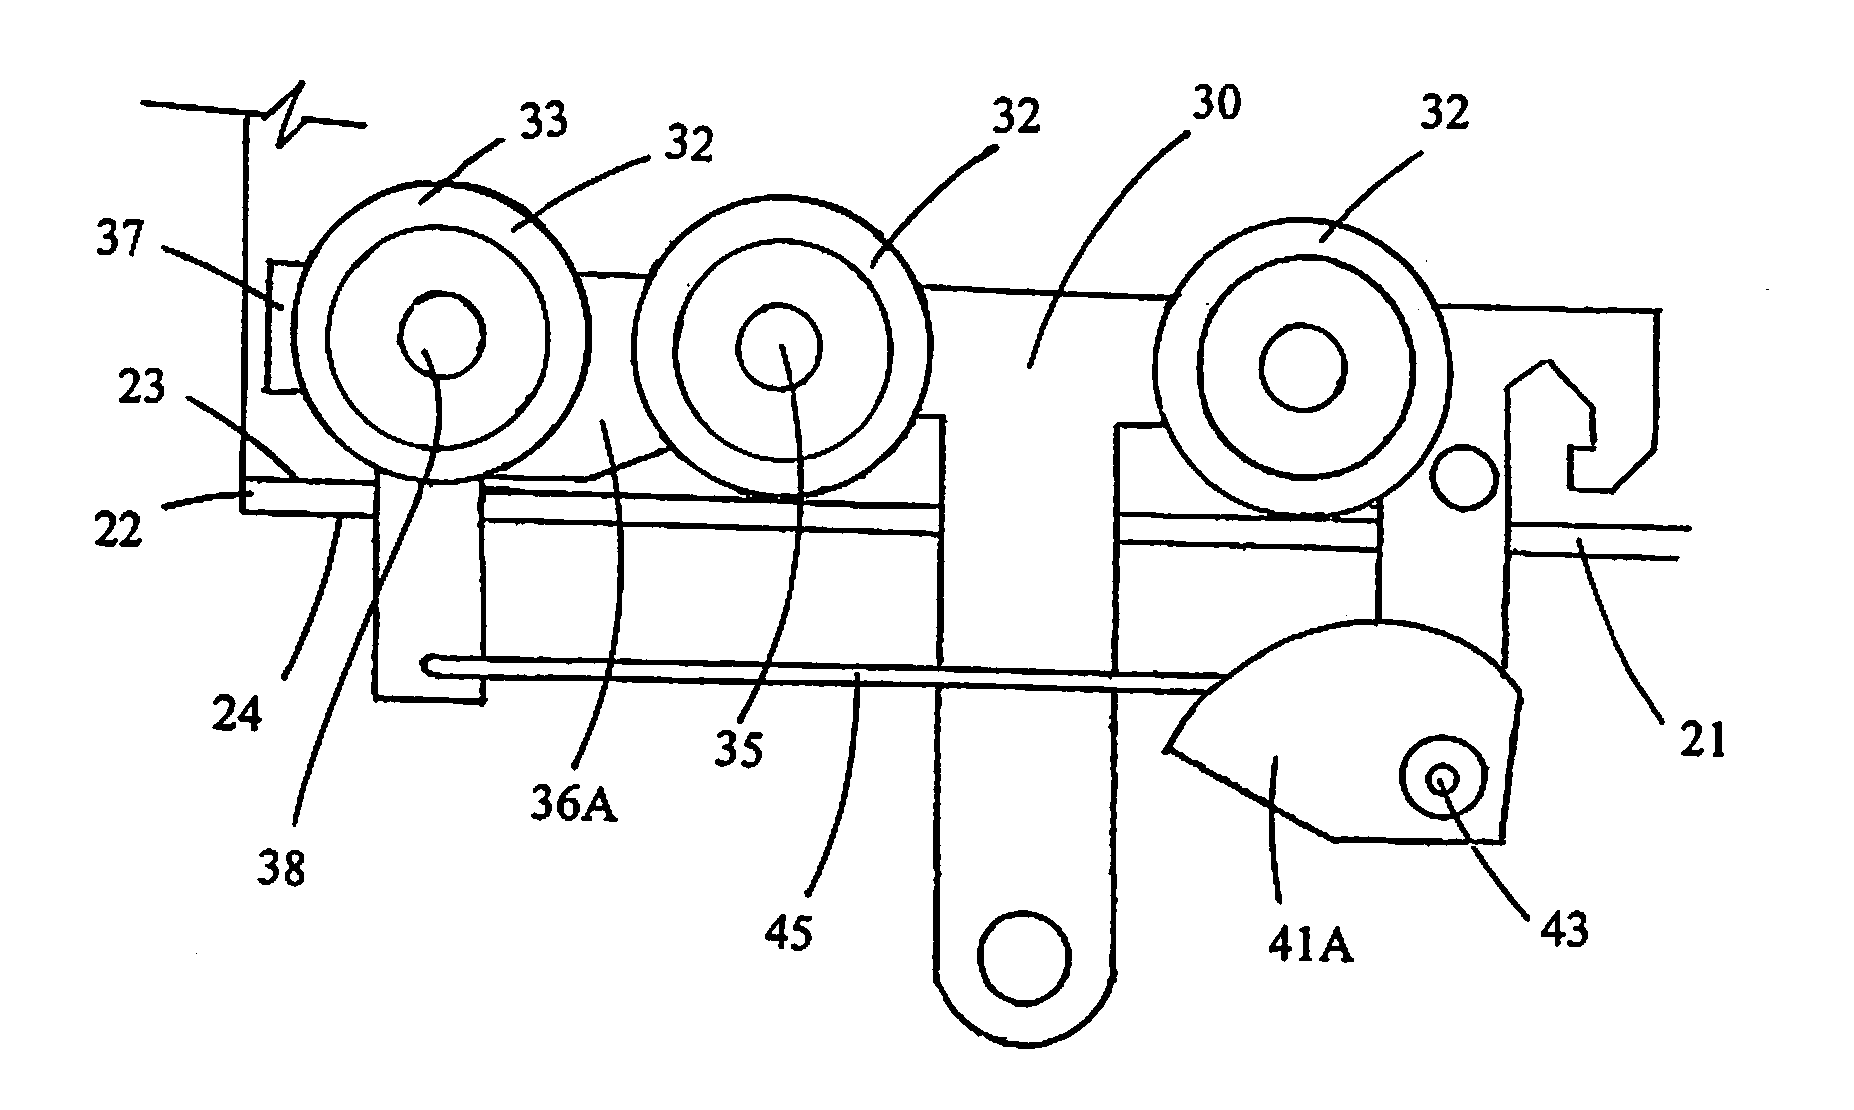 Locking Safety Mechanism for Suspended Transport Apparatus